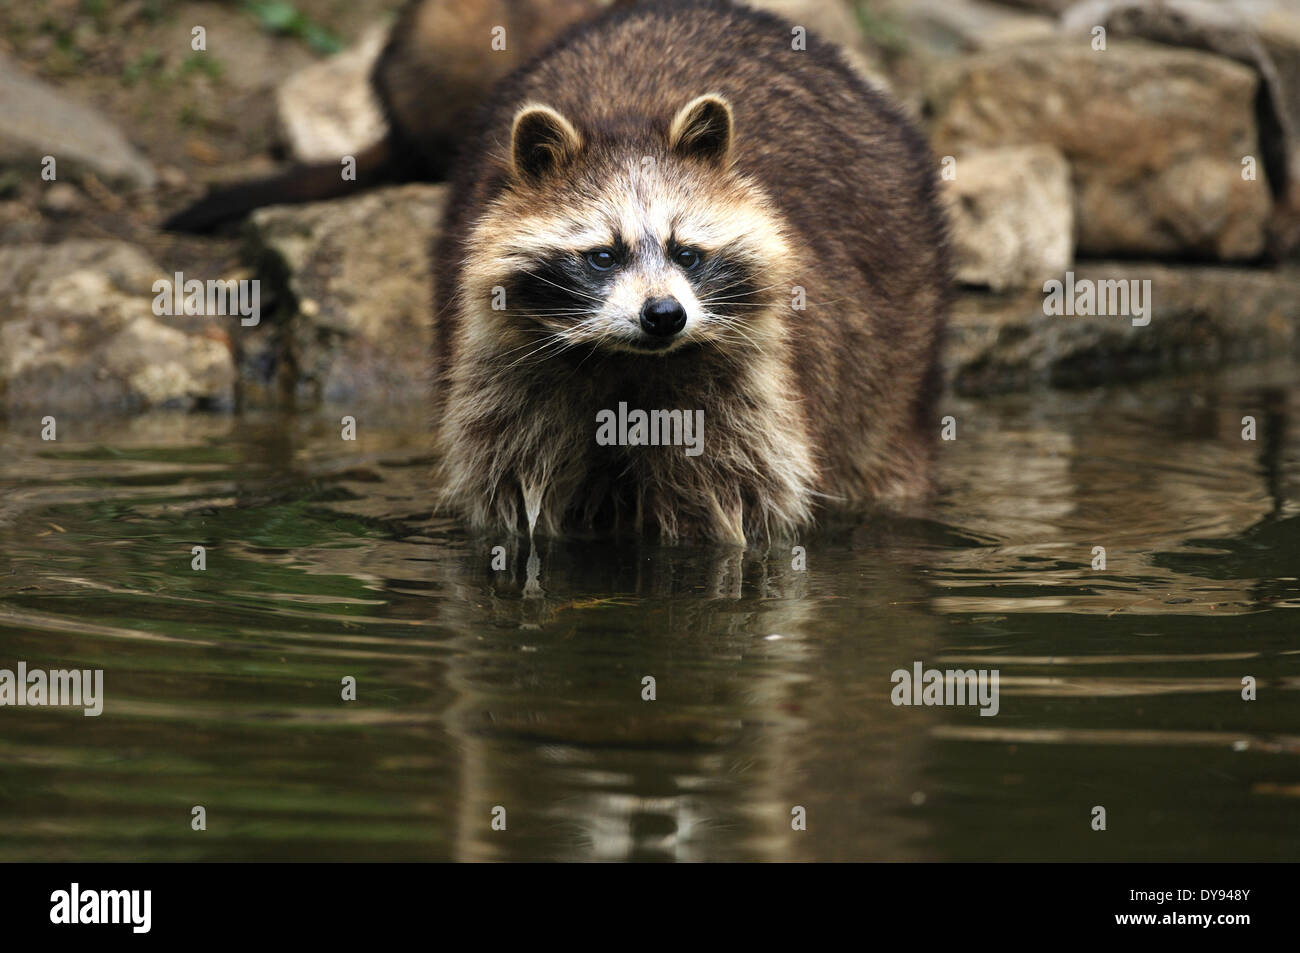 Racoon canids predator small bear North American racoon Procyon lotor racoons racoon foraging water fur animal invasive Immigr Stock Photo